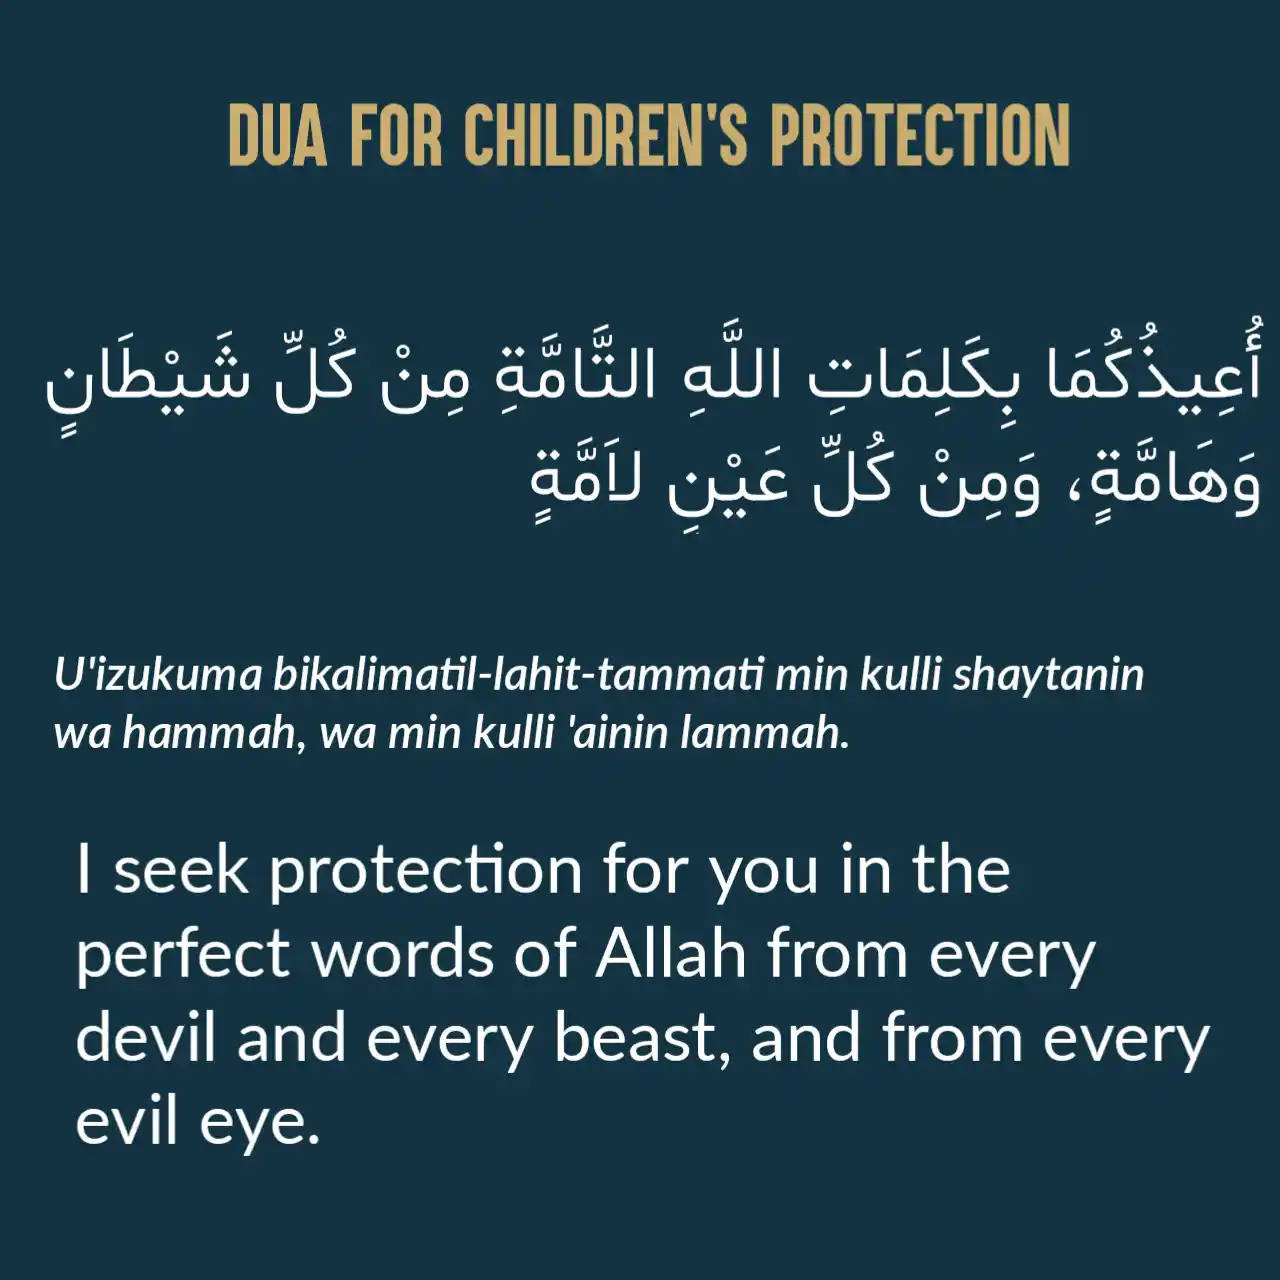 Dua for Children's Protection